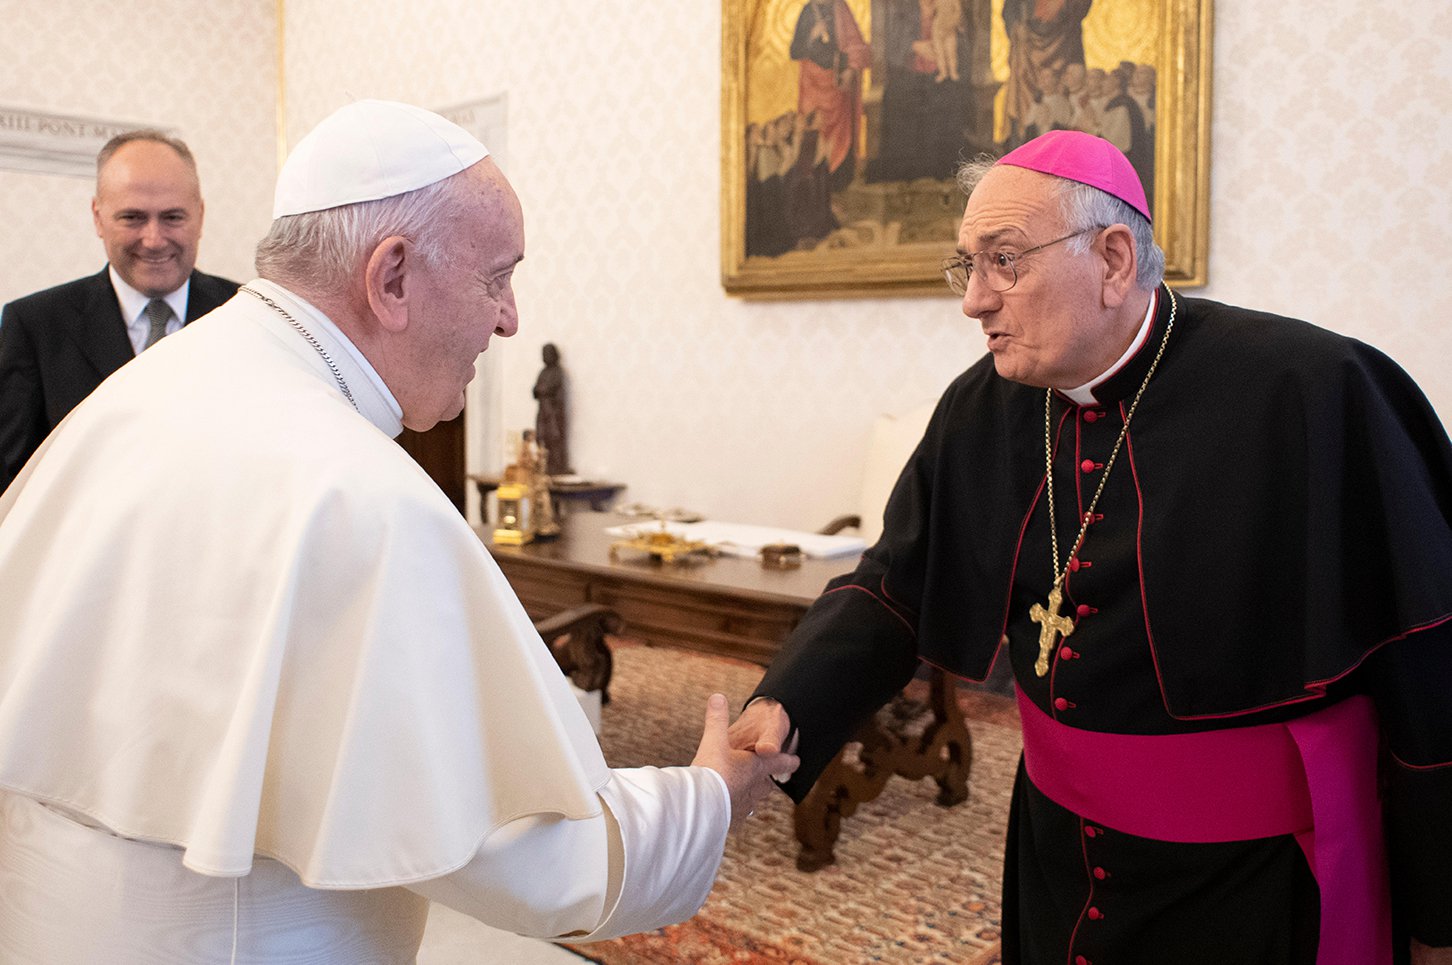 Pope Francis sends his condolences to Diocese of Brooklyn, two local priests that died due to COVID-19